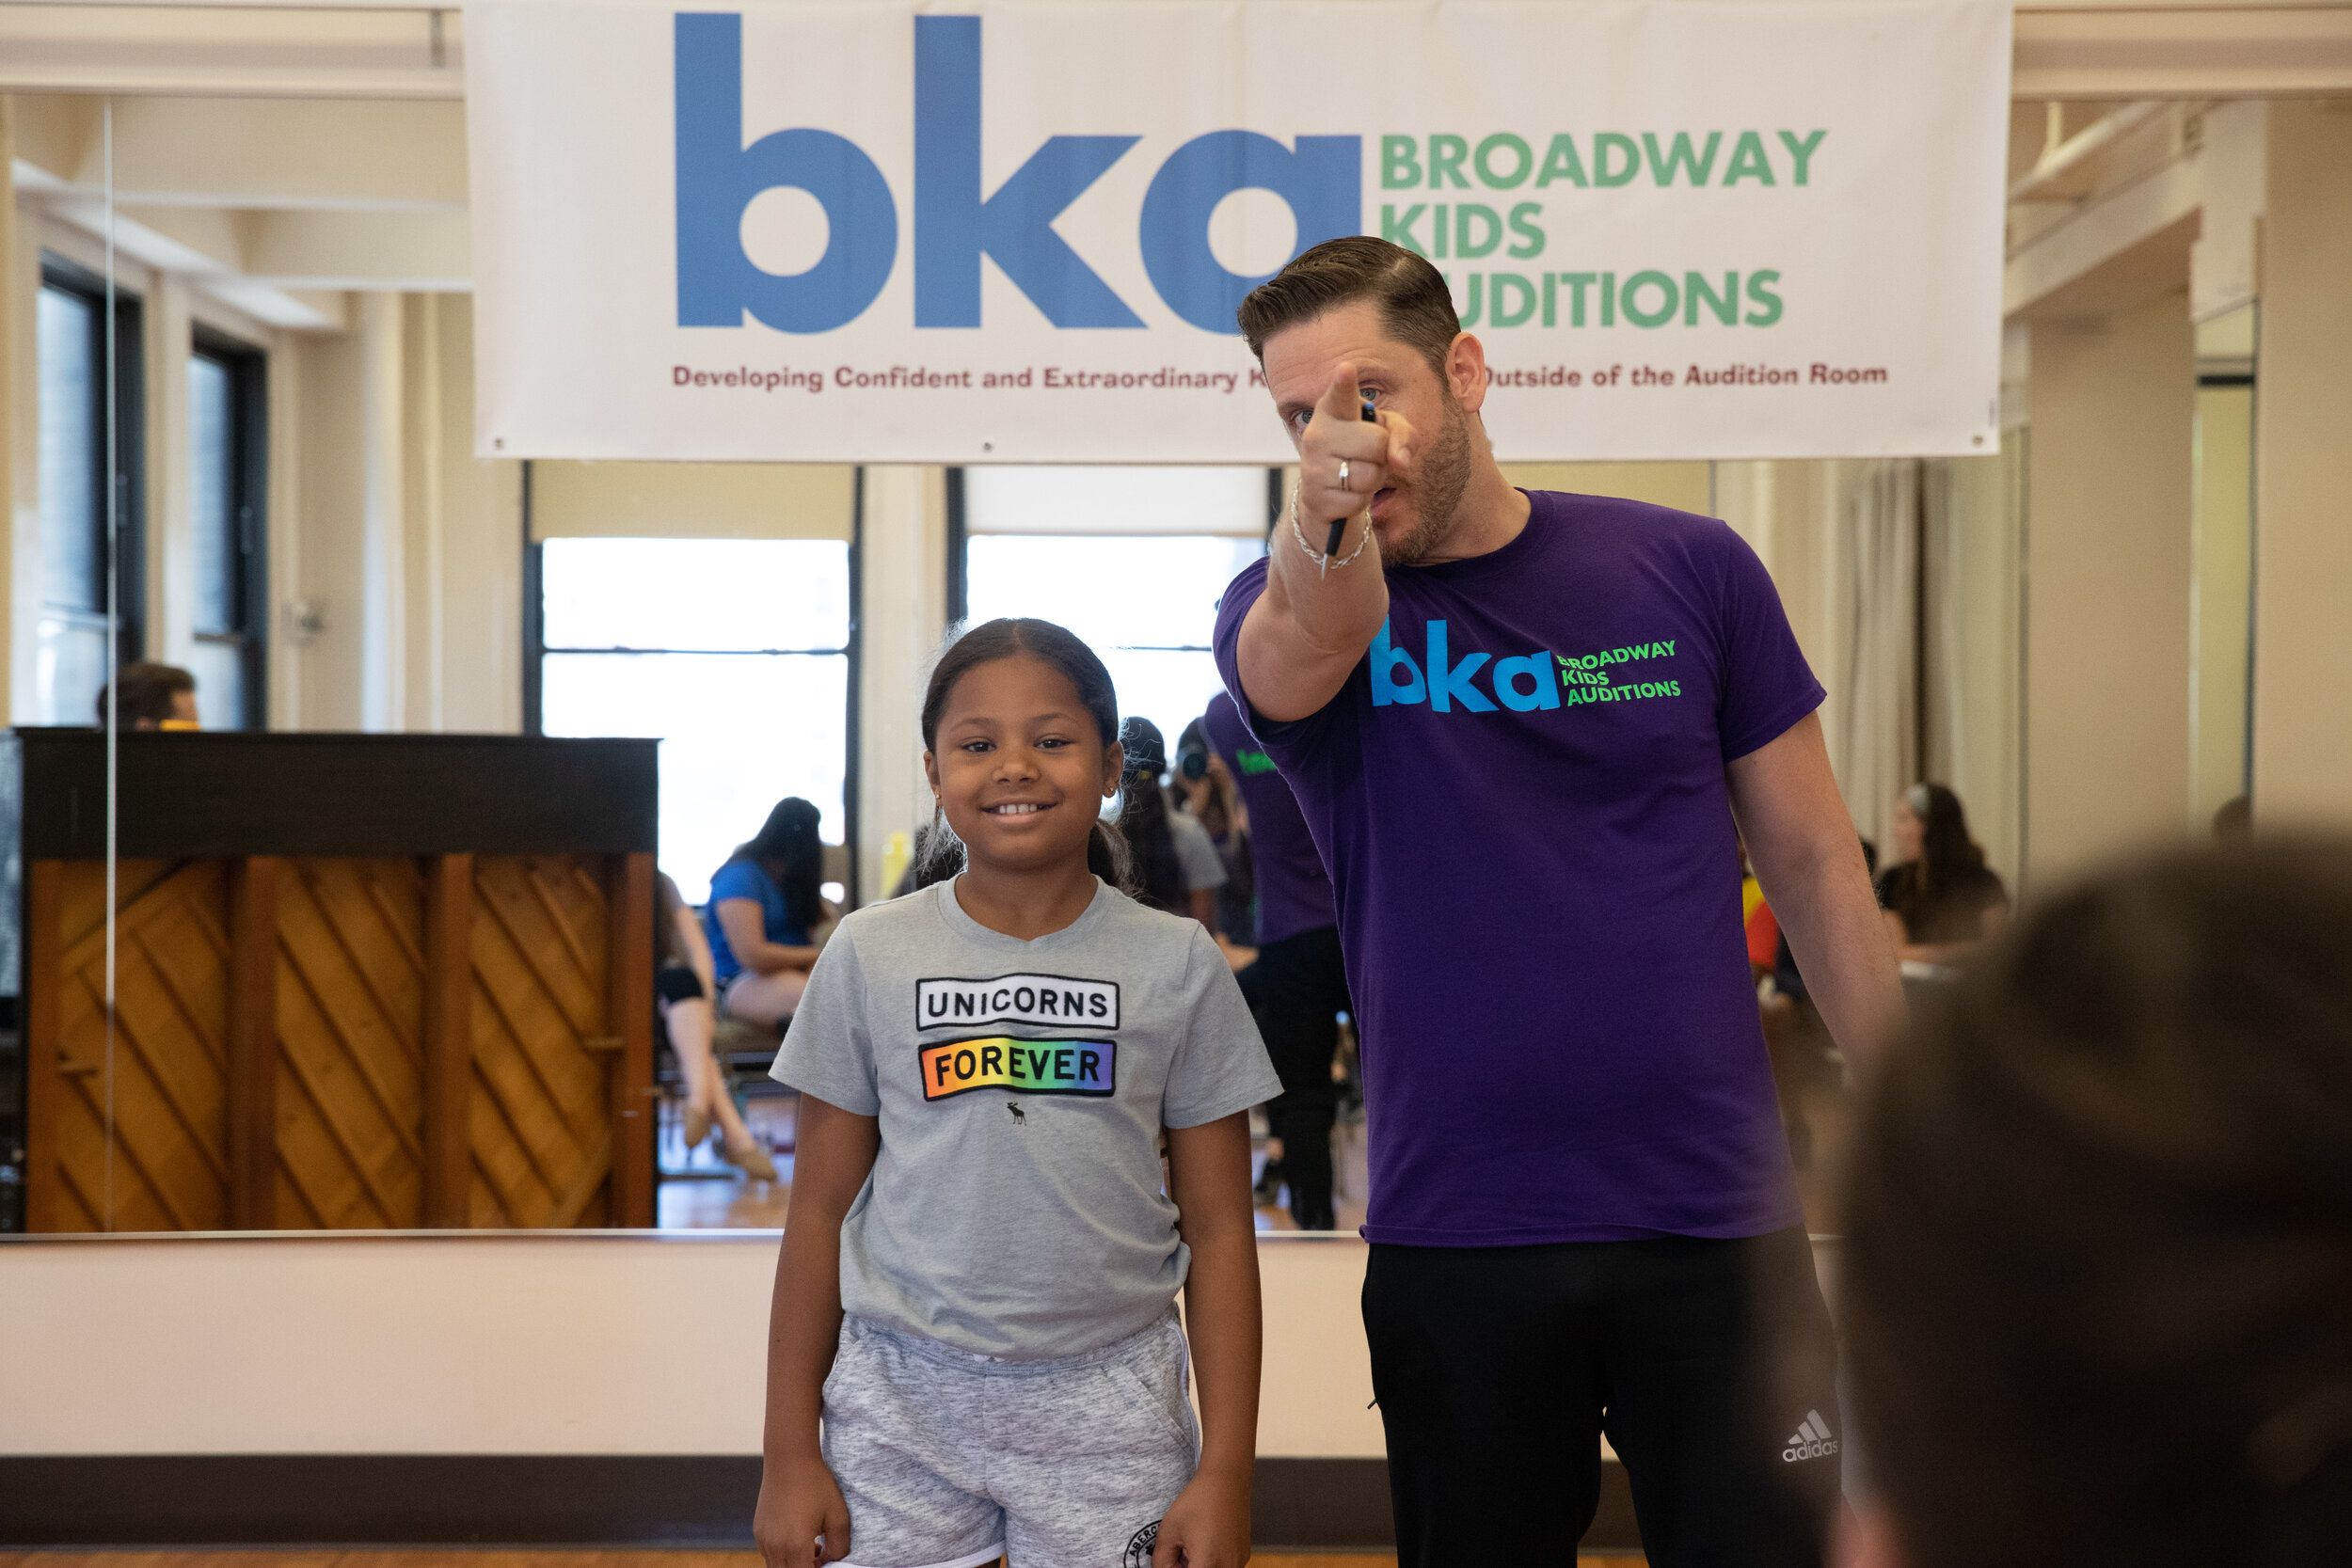 Broadway Kids Auditions